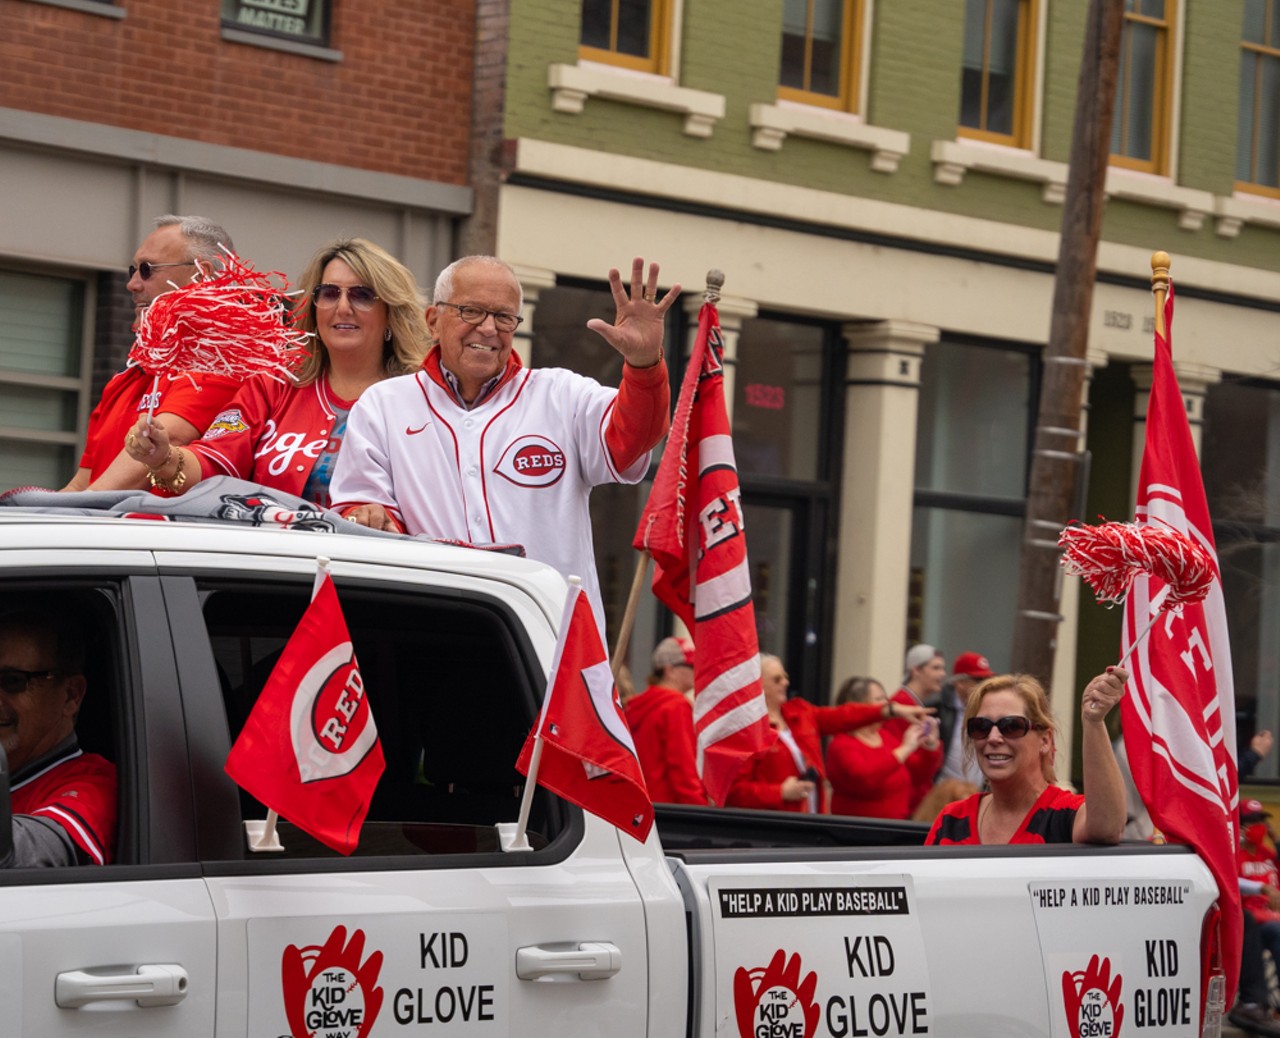 Everything We Saw During the Reds Opening Day Parade Cincinnati